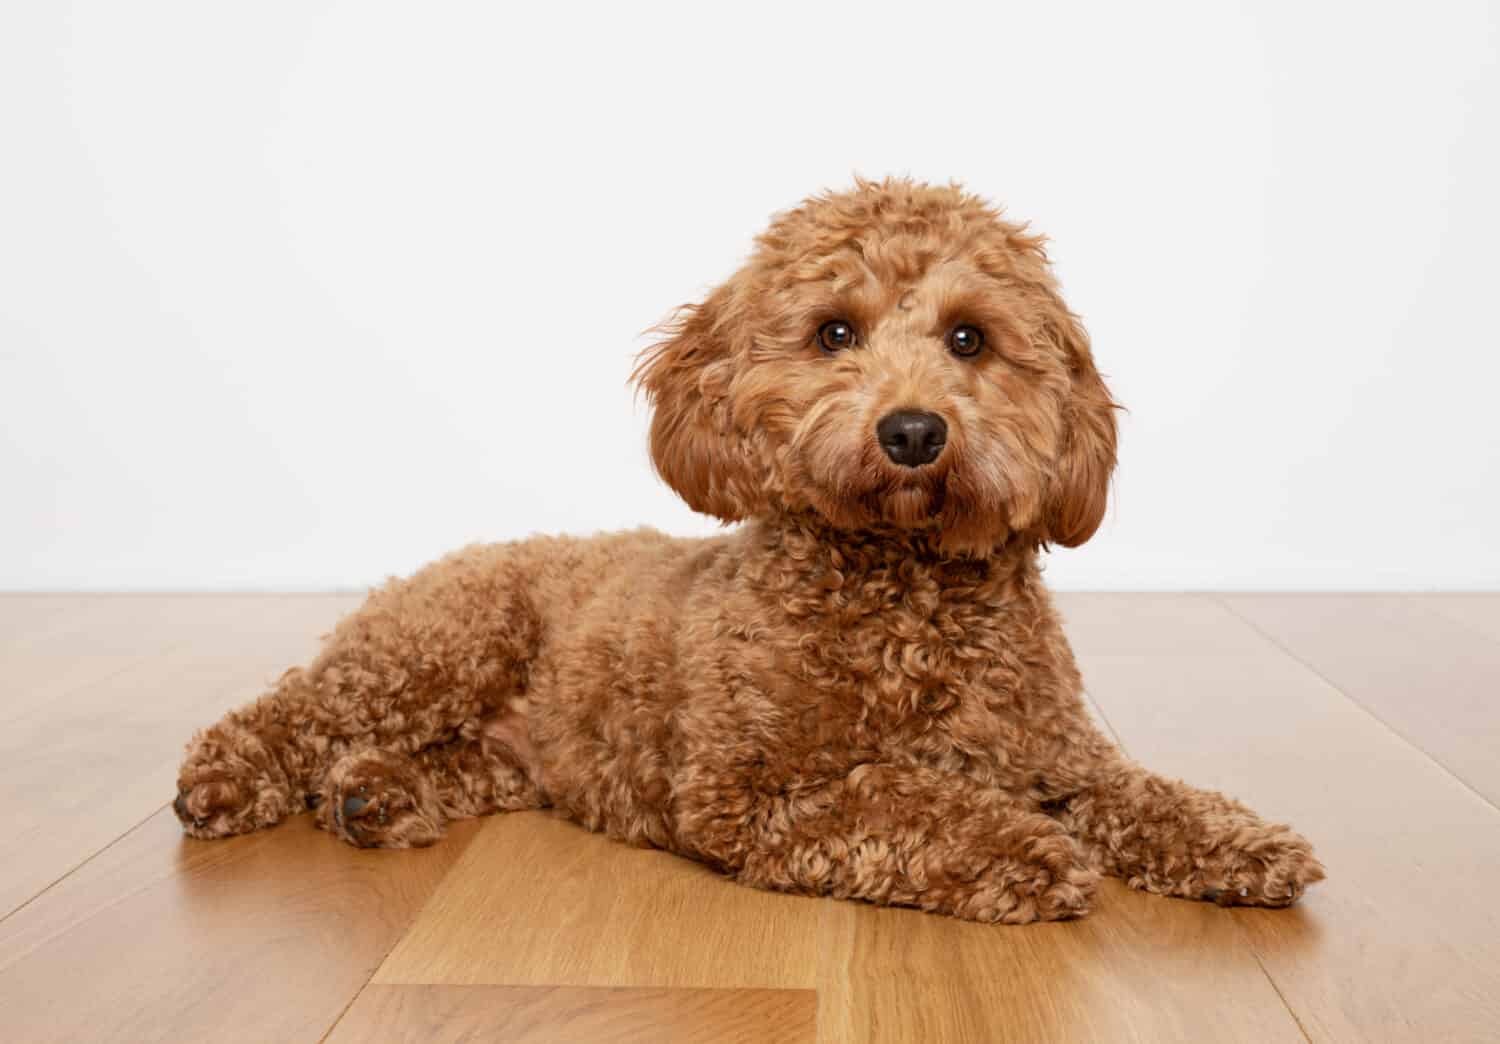 Cavapoo dog lying on a wooden floor with a white background.